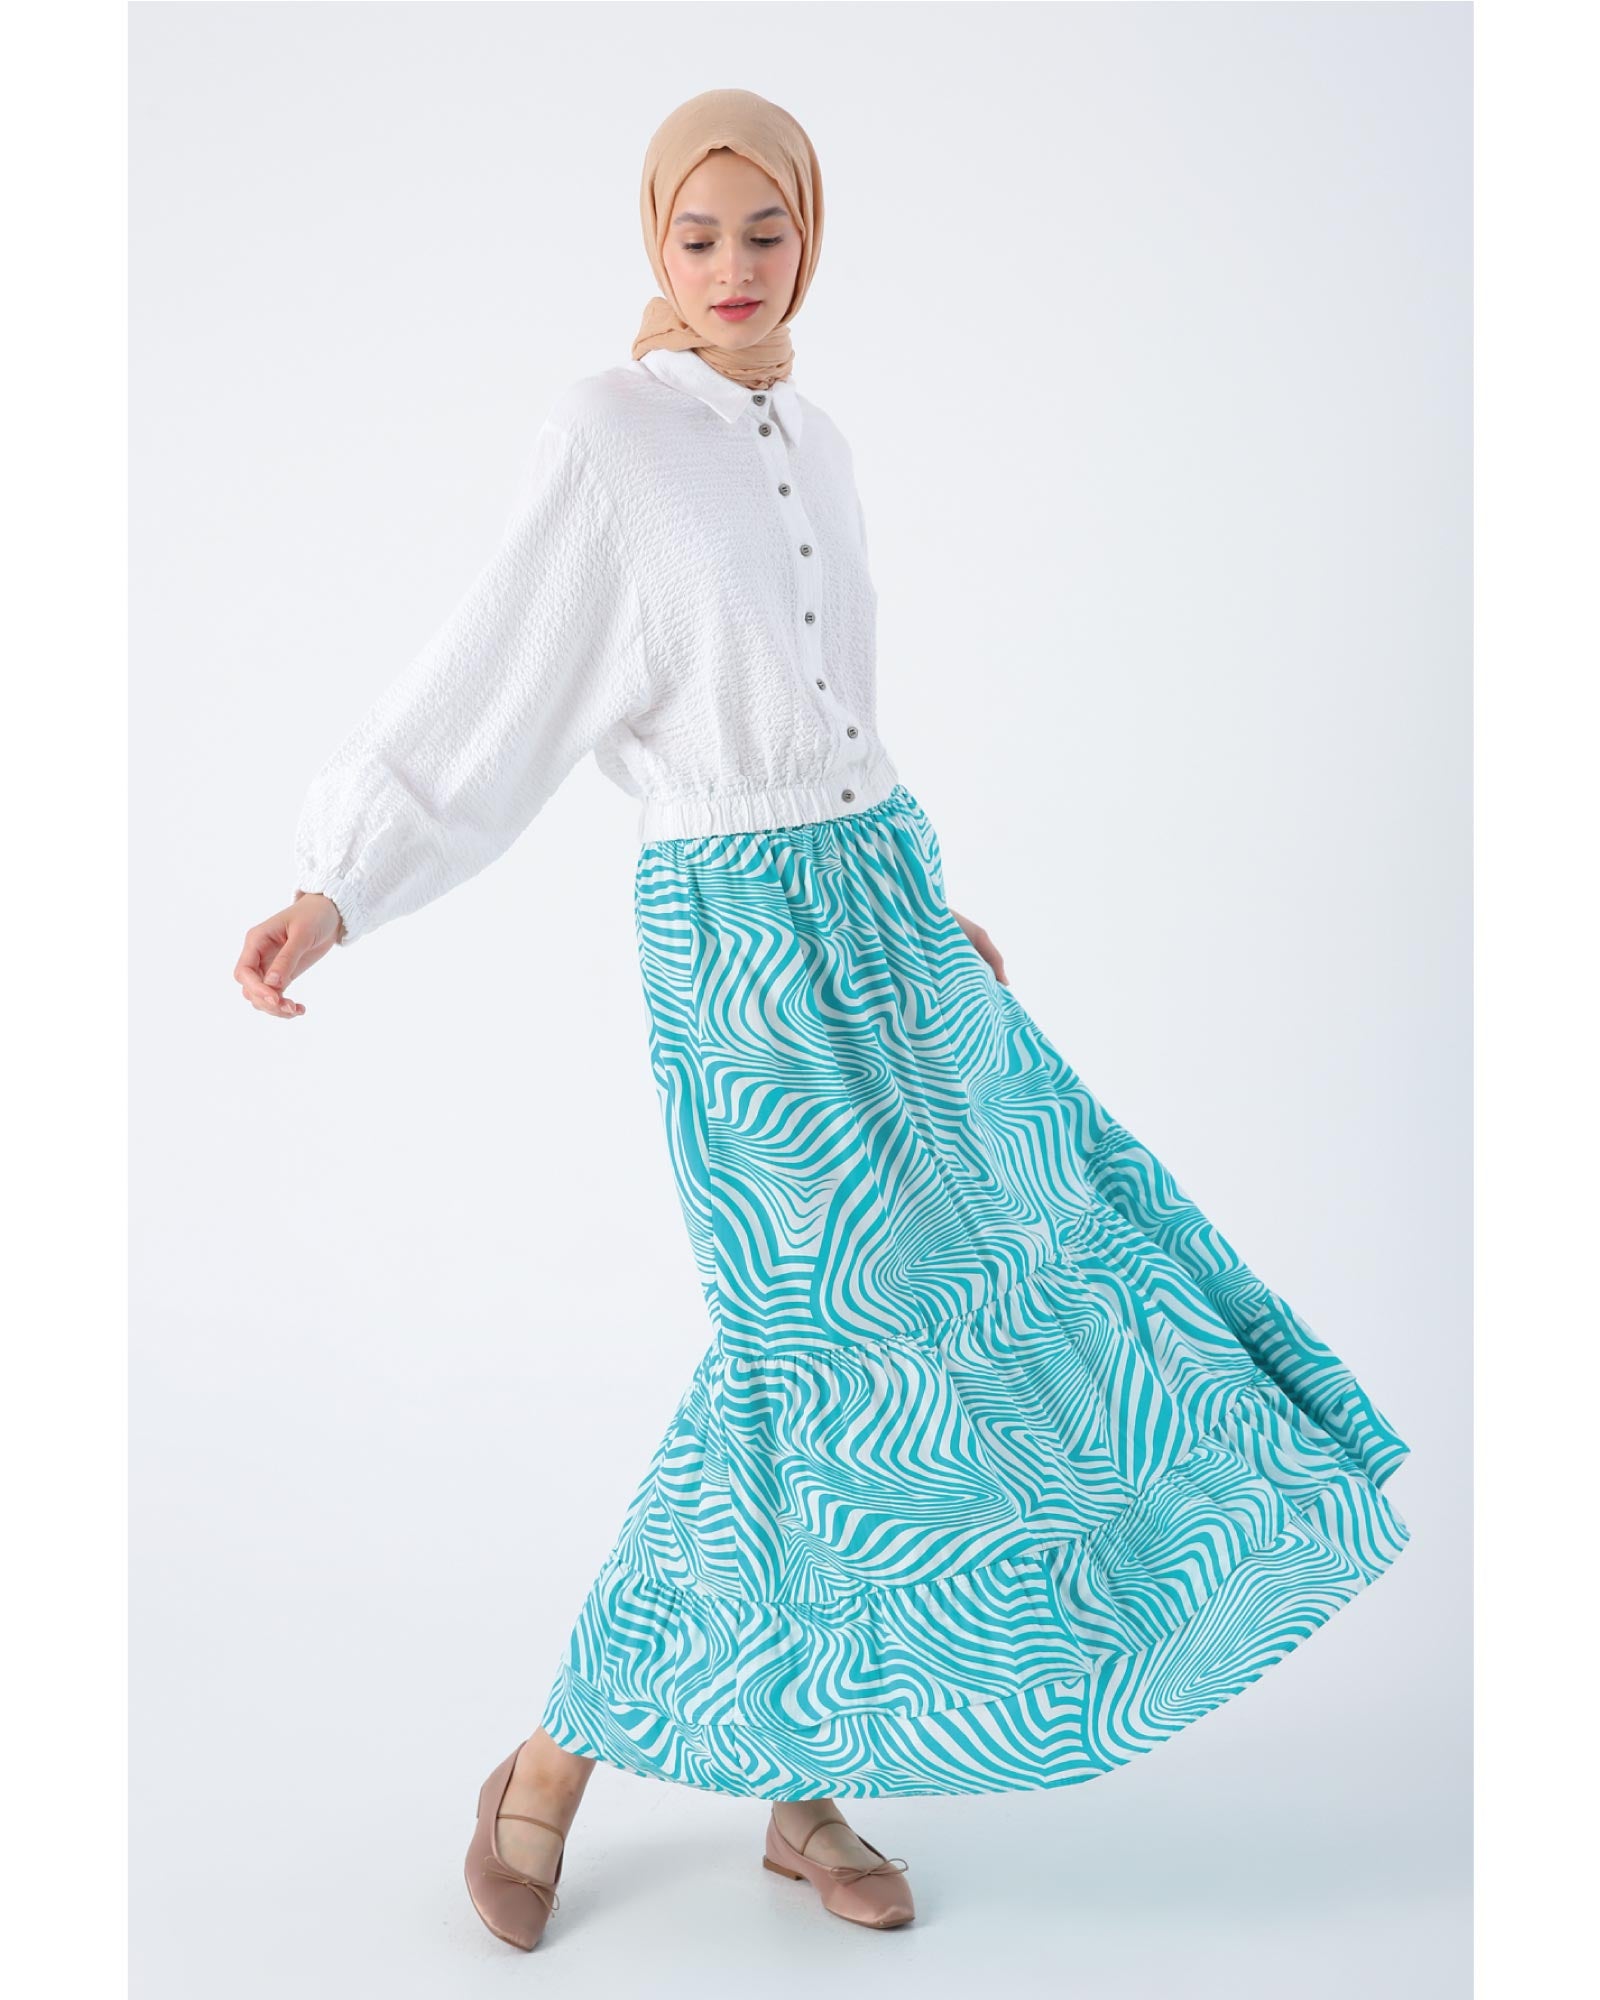 Hijab- 100% cotton printed skirt with gathered details at elastic waistband.